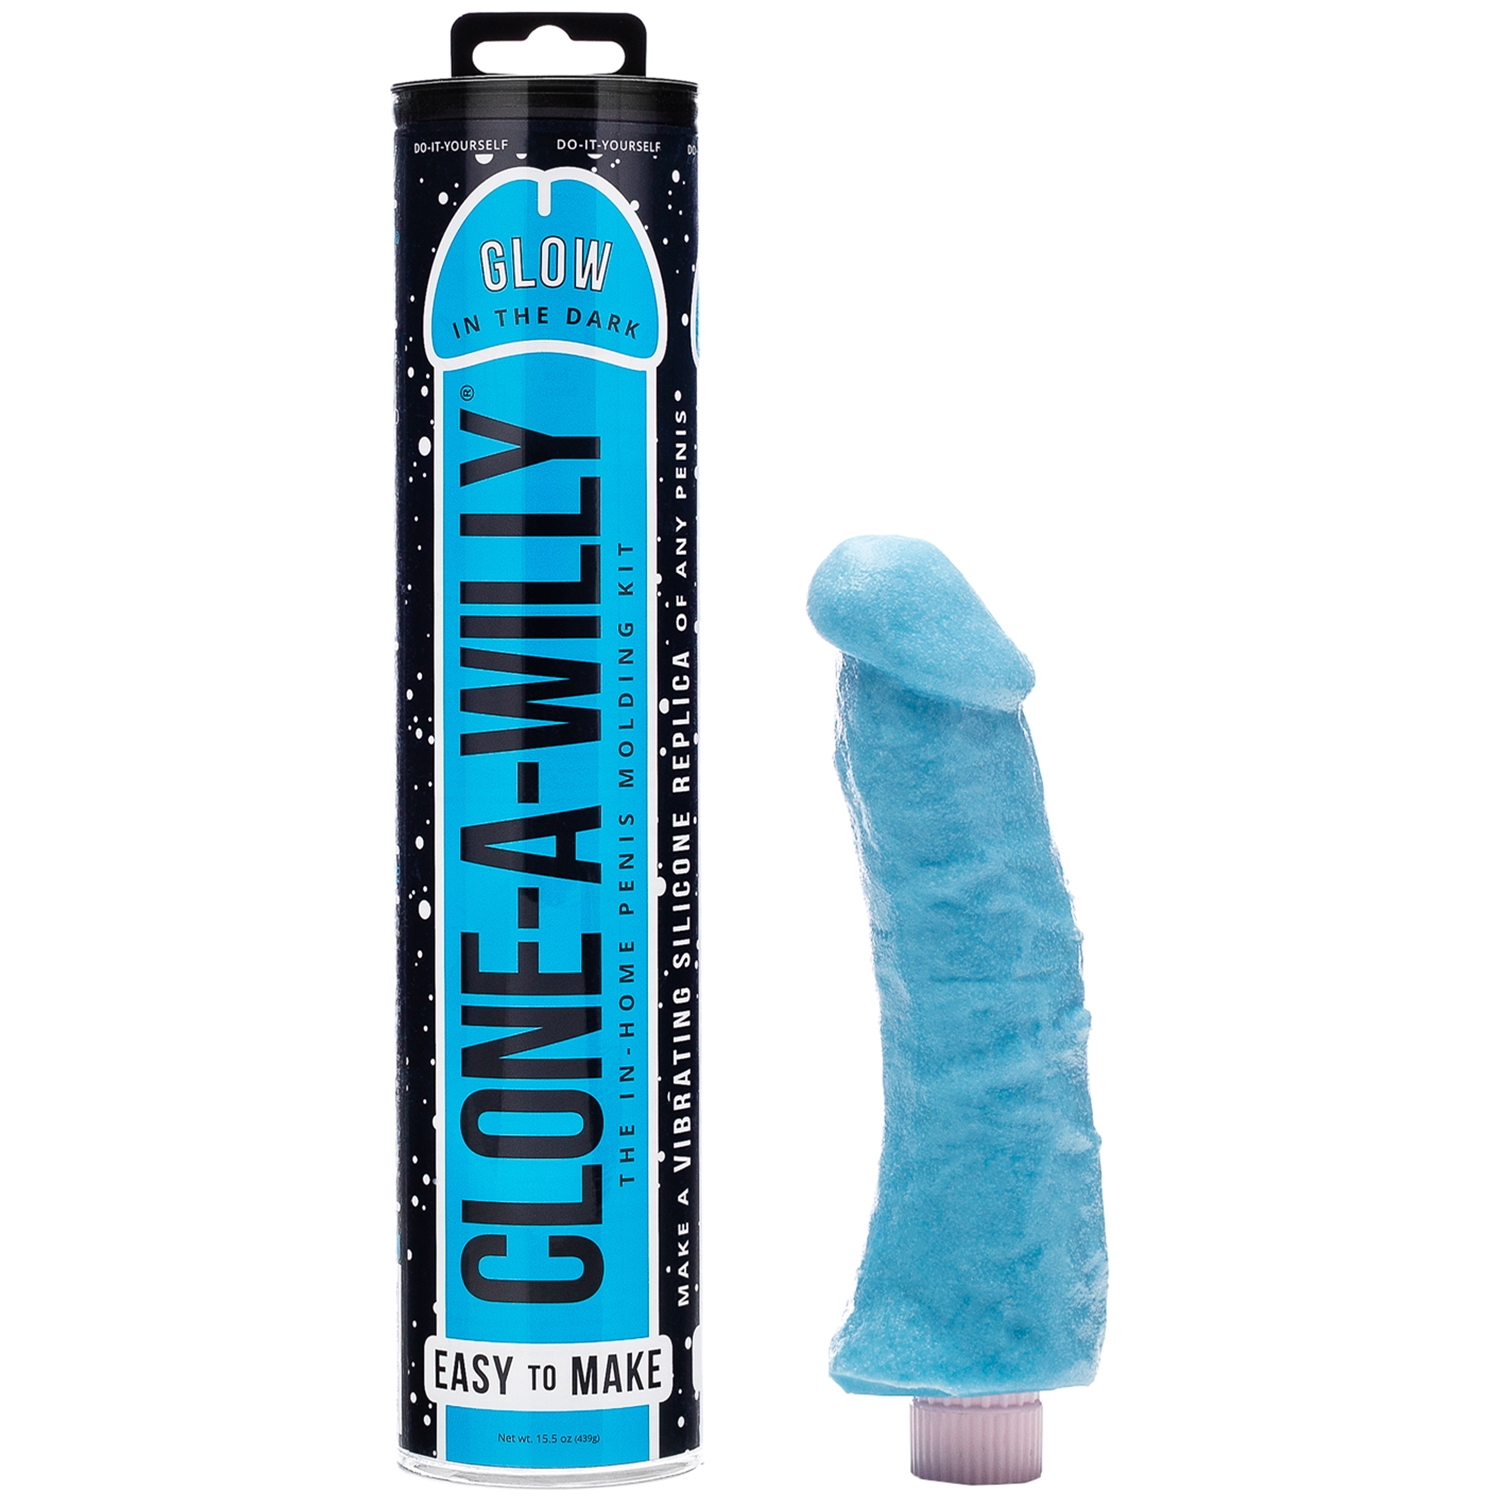 Clone-A-Willy Clone-A-Willy DIY Homemade Dildo Clone Kit Glow In The Dark Blue - Blå